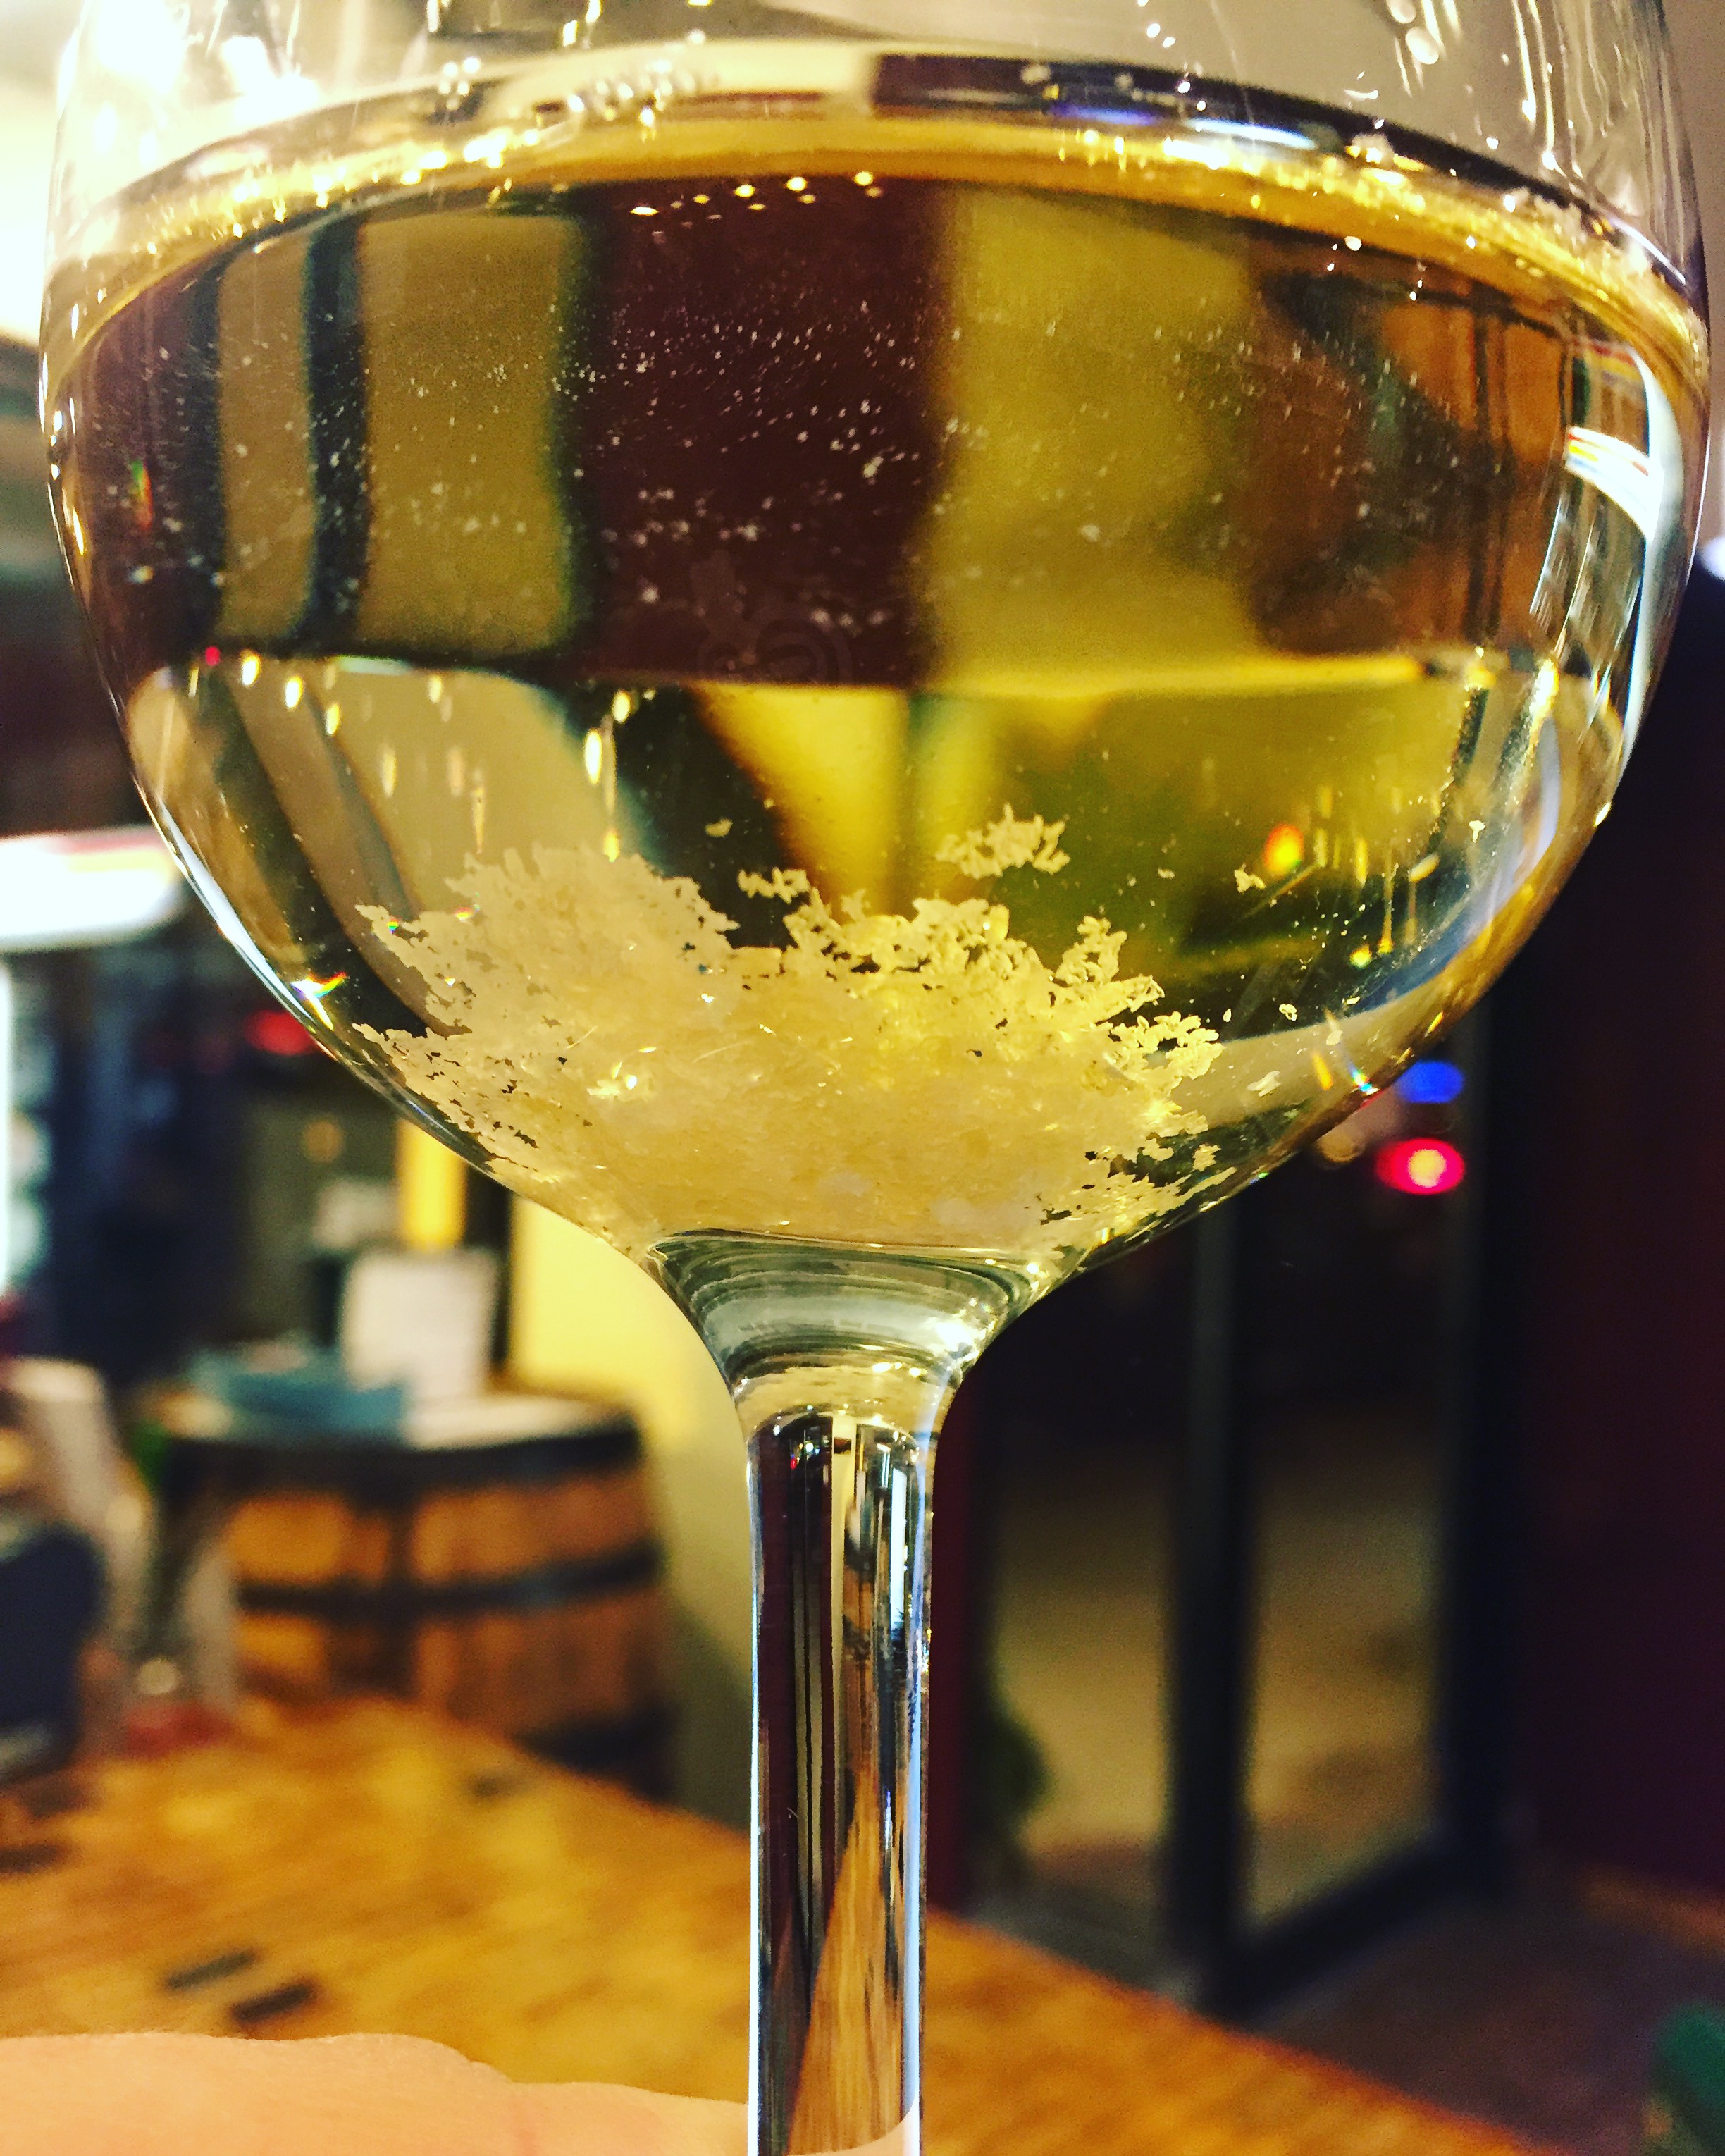 White wine with tartrate crystals in bottom of glass